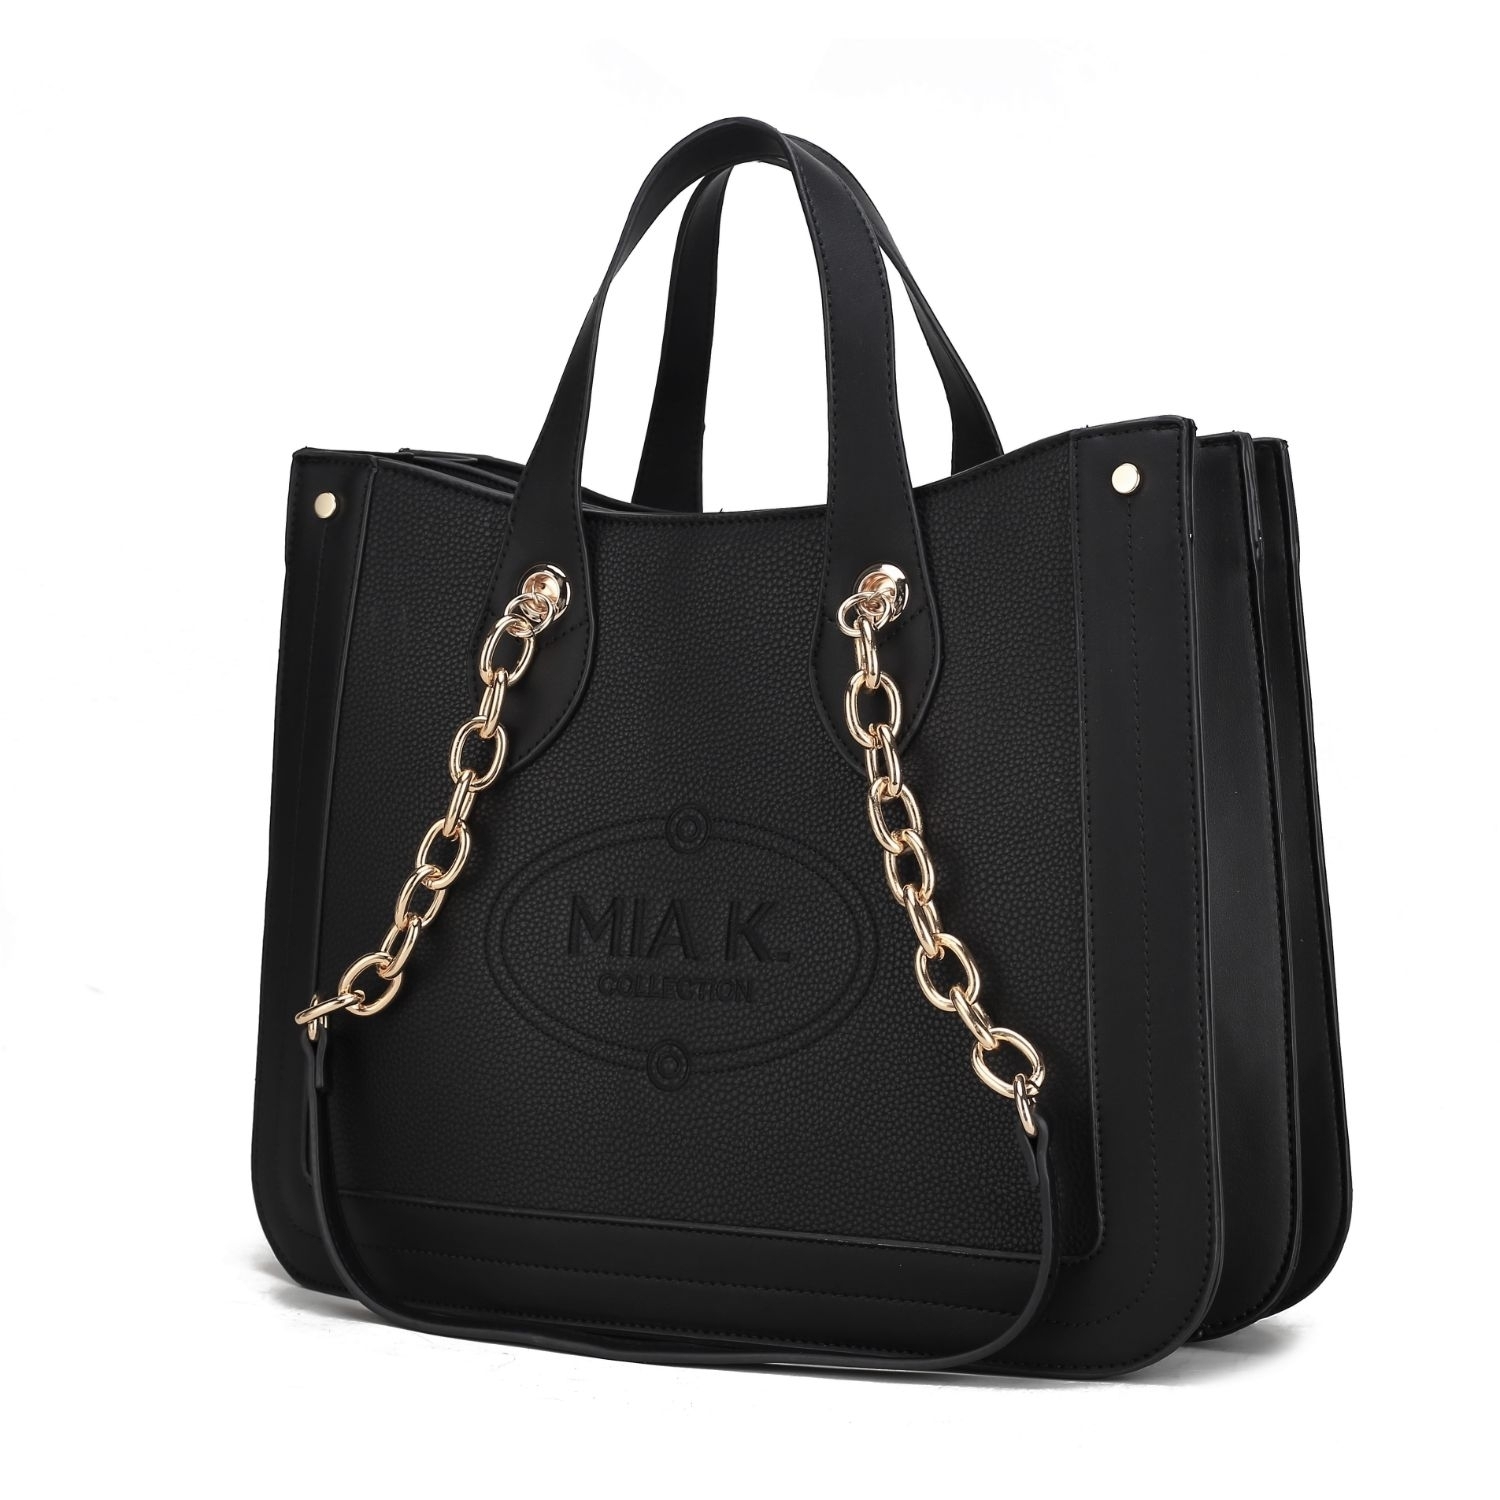 MKF Collection Stella Vegan Leather Women's Handbag Double Compartment Oversize Classy Tote By Mia K. - Navy